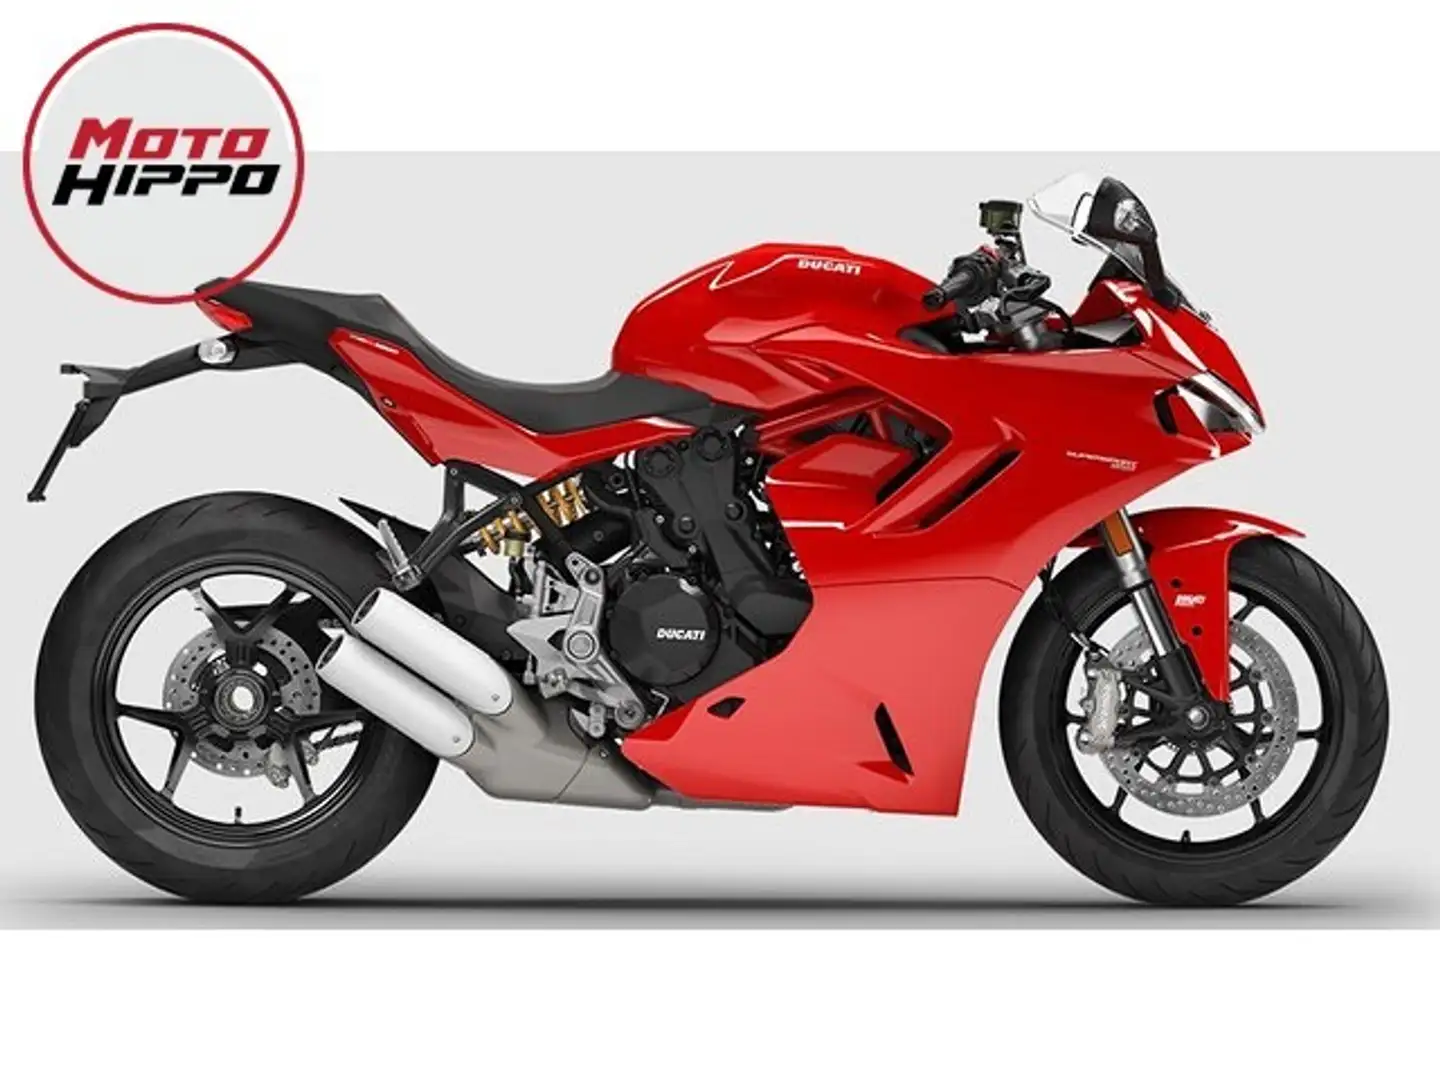 Ducati SuperSport Red - 1